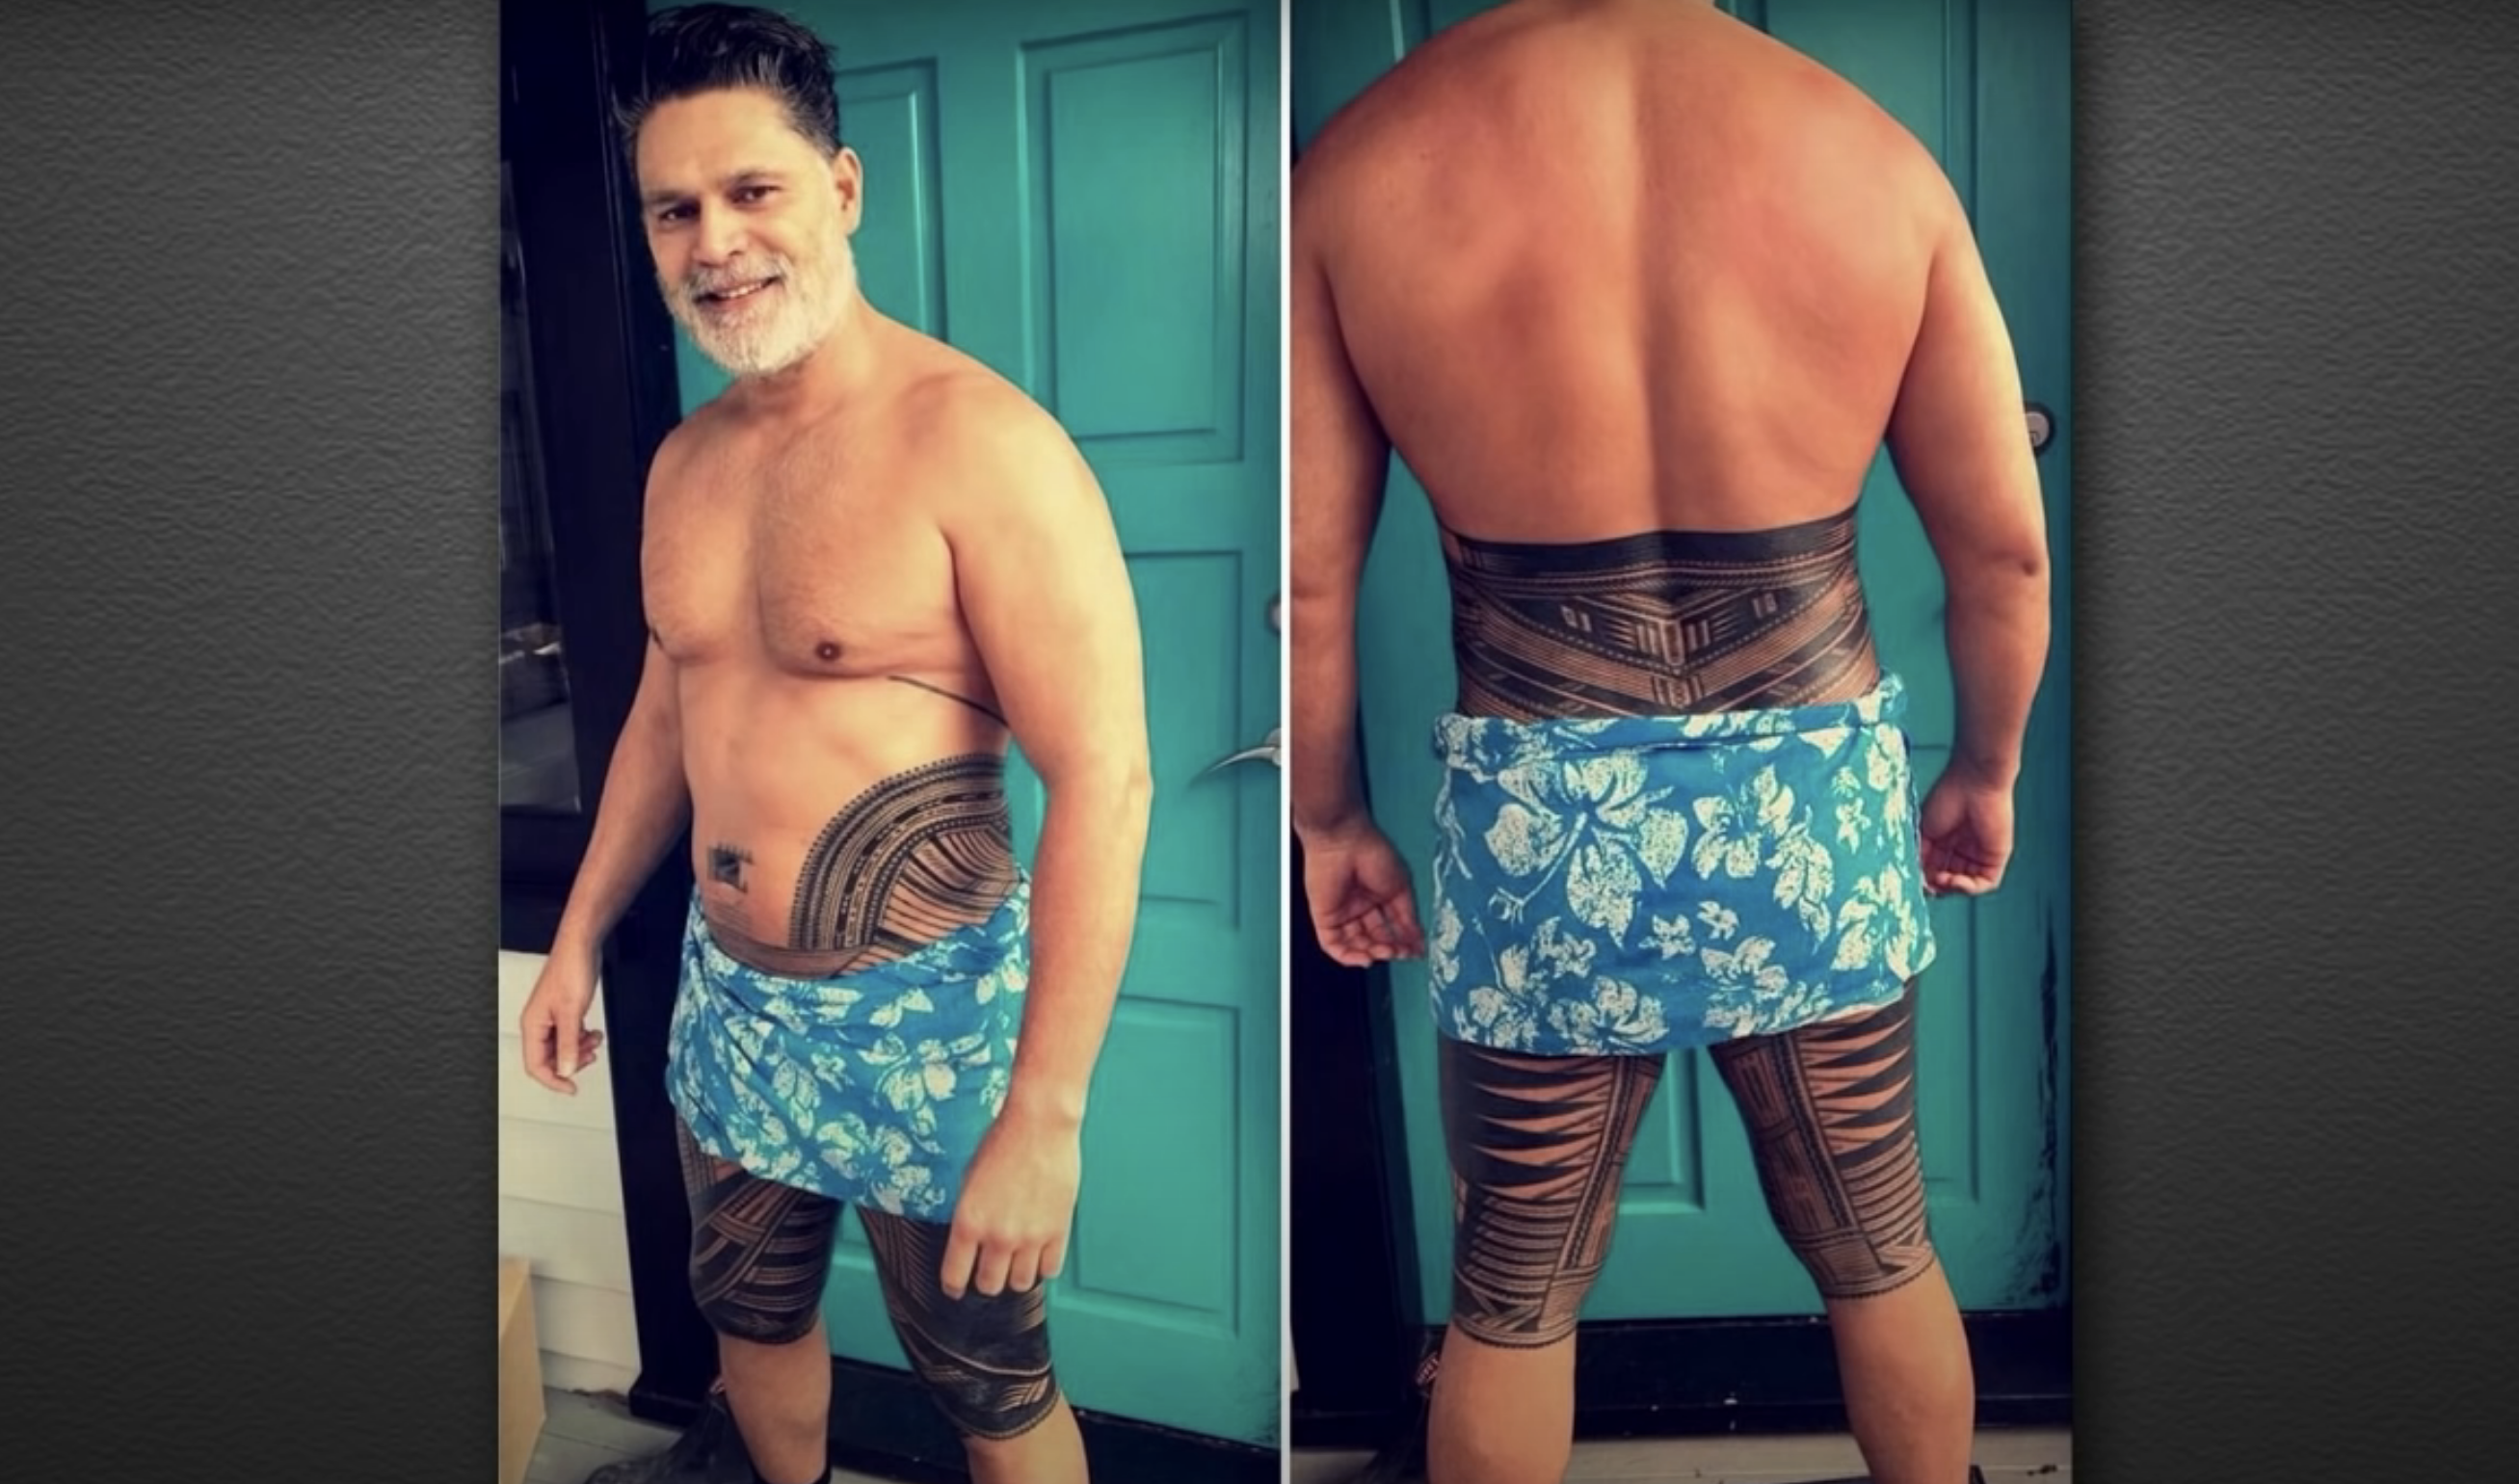 KJ&#x27;s father displaying his traditional Samoan tattoo which covers his lower back and wraps around his upper legs